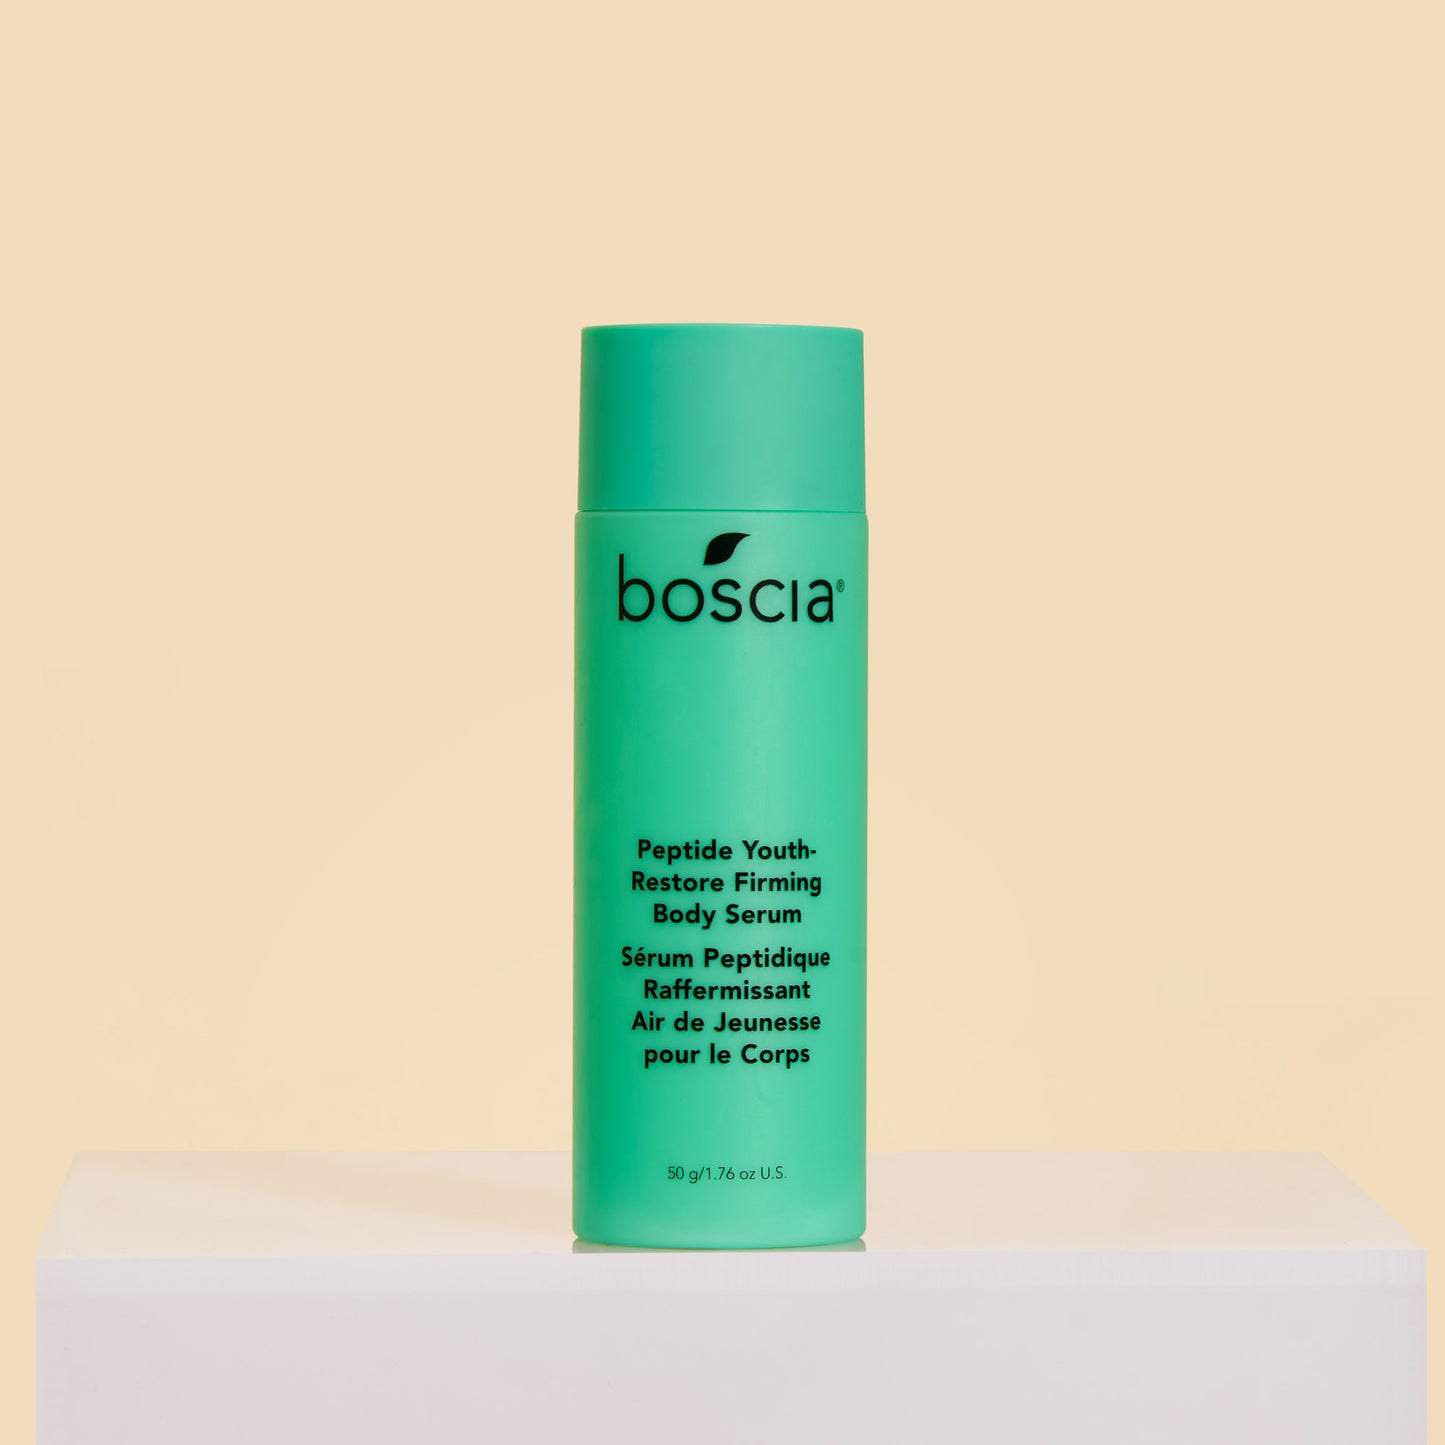 Travel Size Peptide Youth-Restore Firming Body Serum